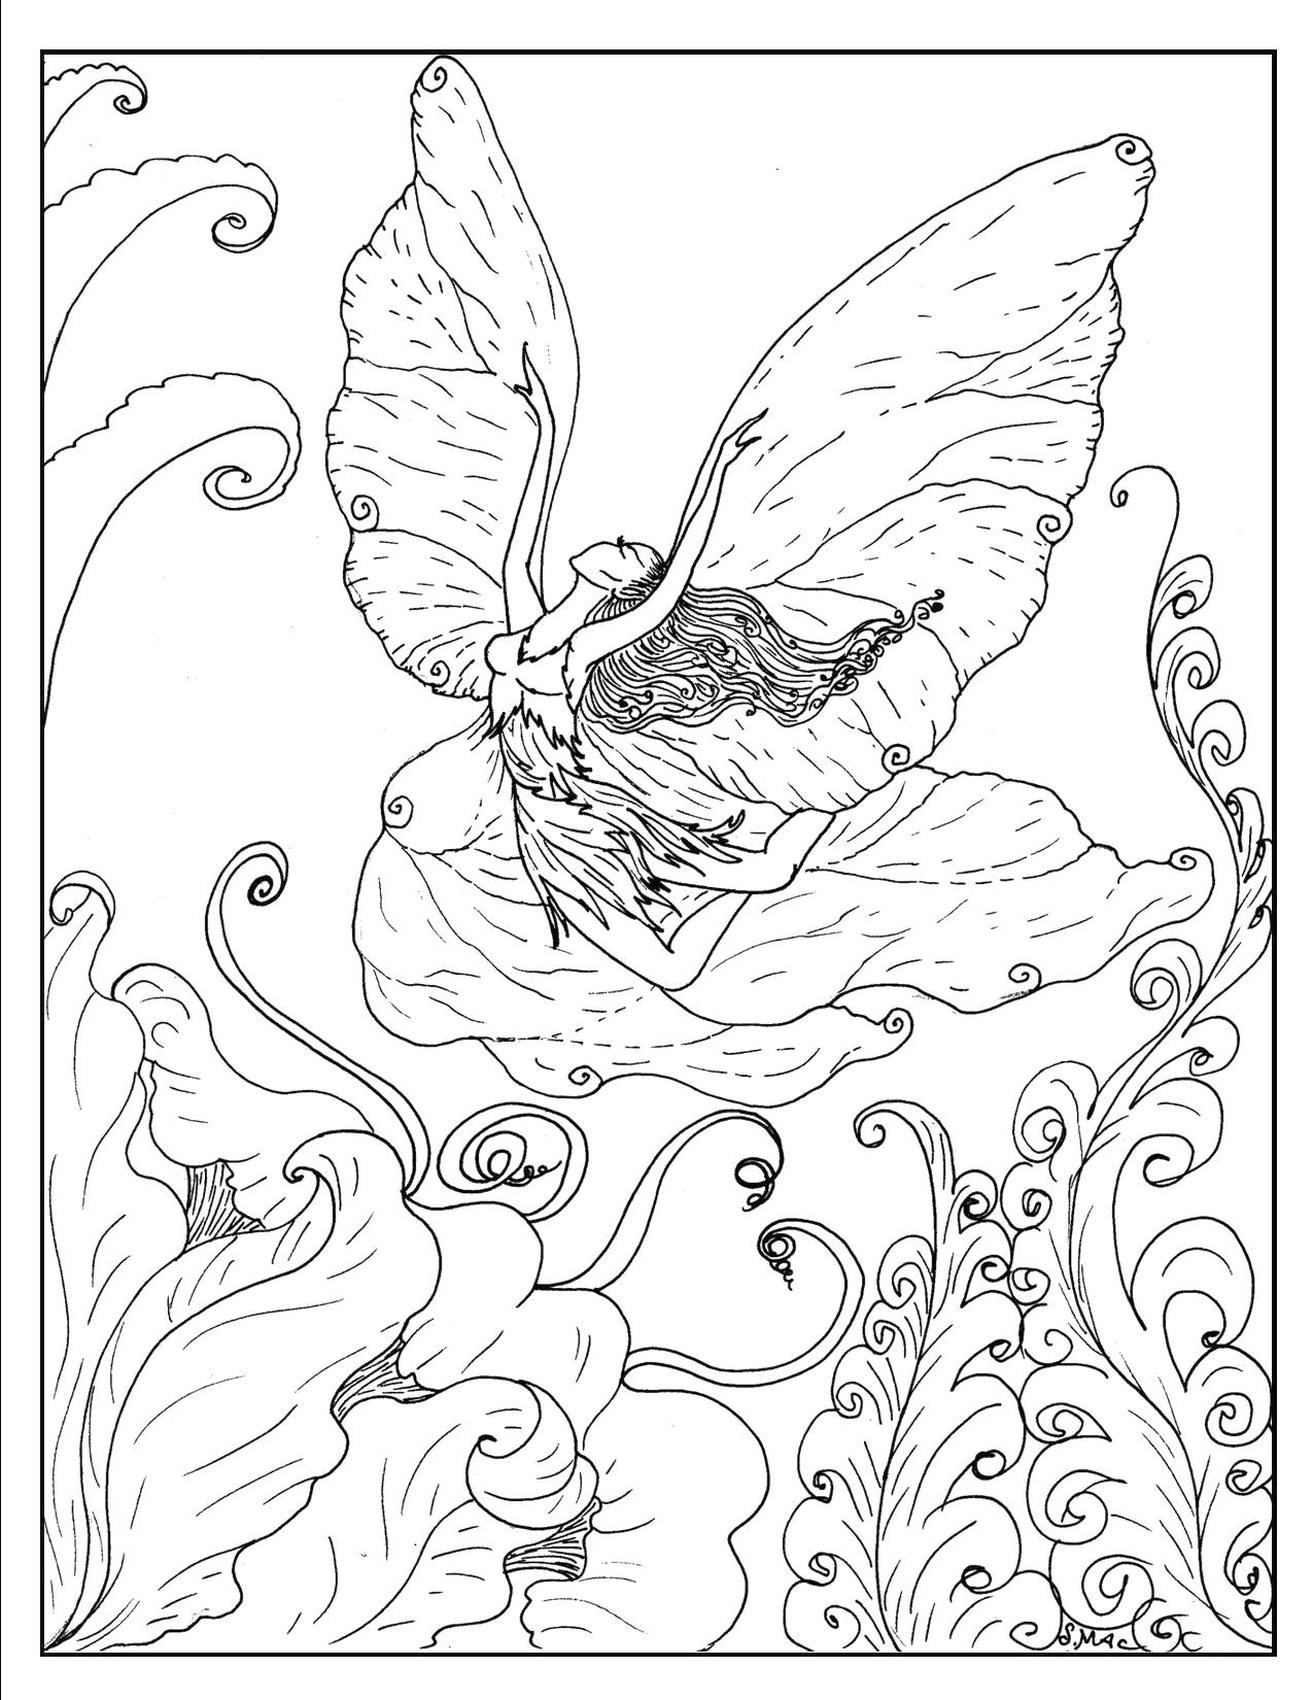 Get This Fantasy Adult Coloring Pages Fairy Flying Like Butterfly